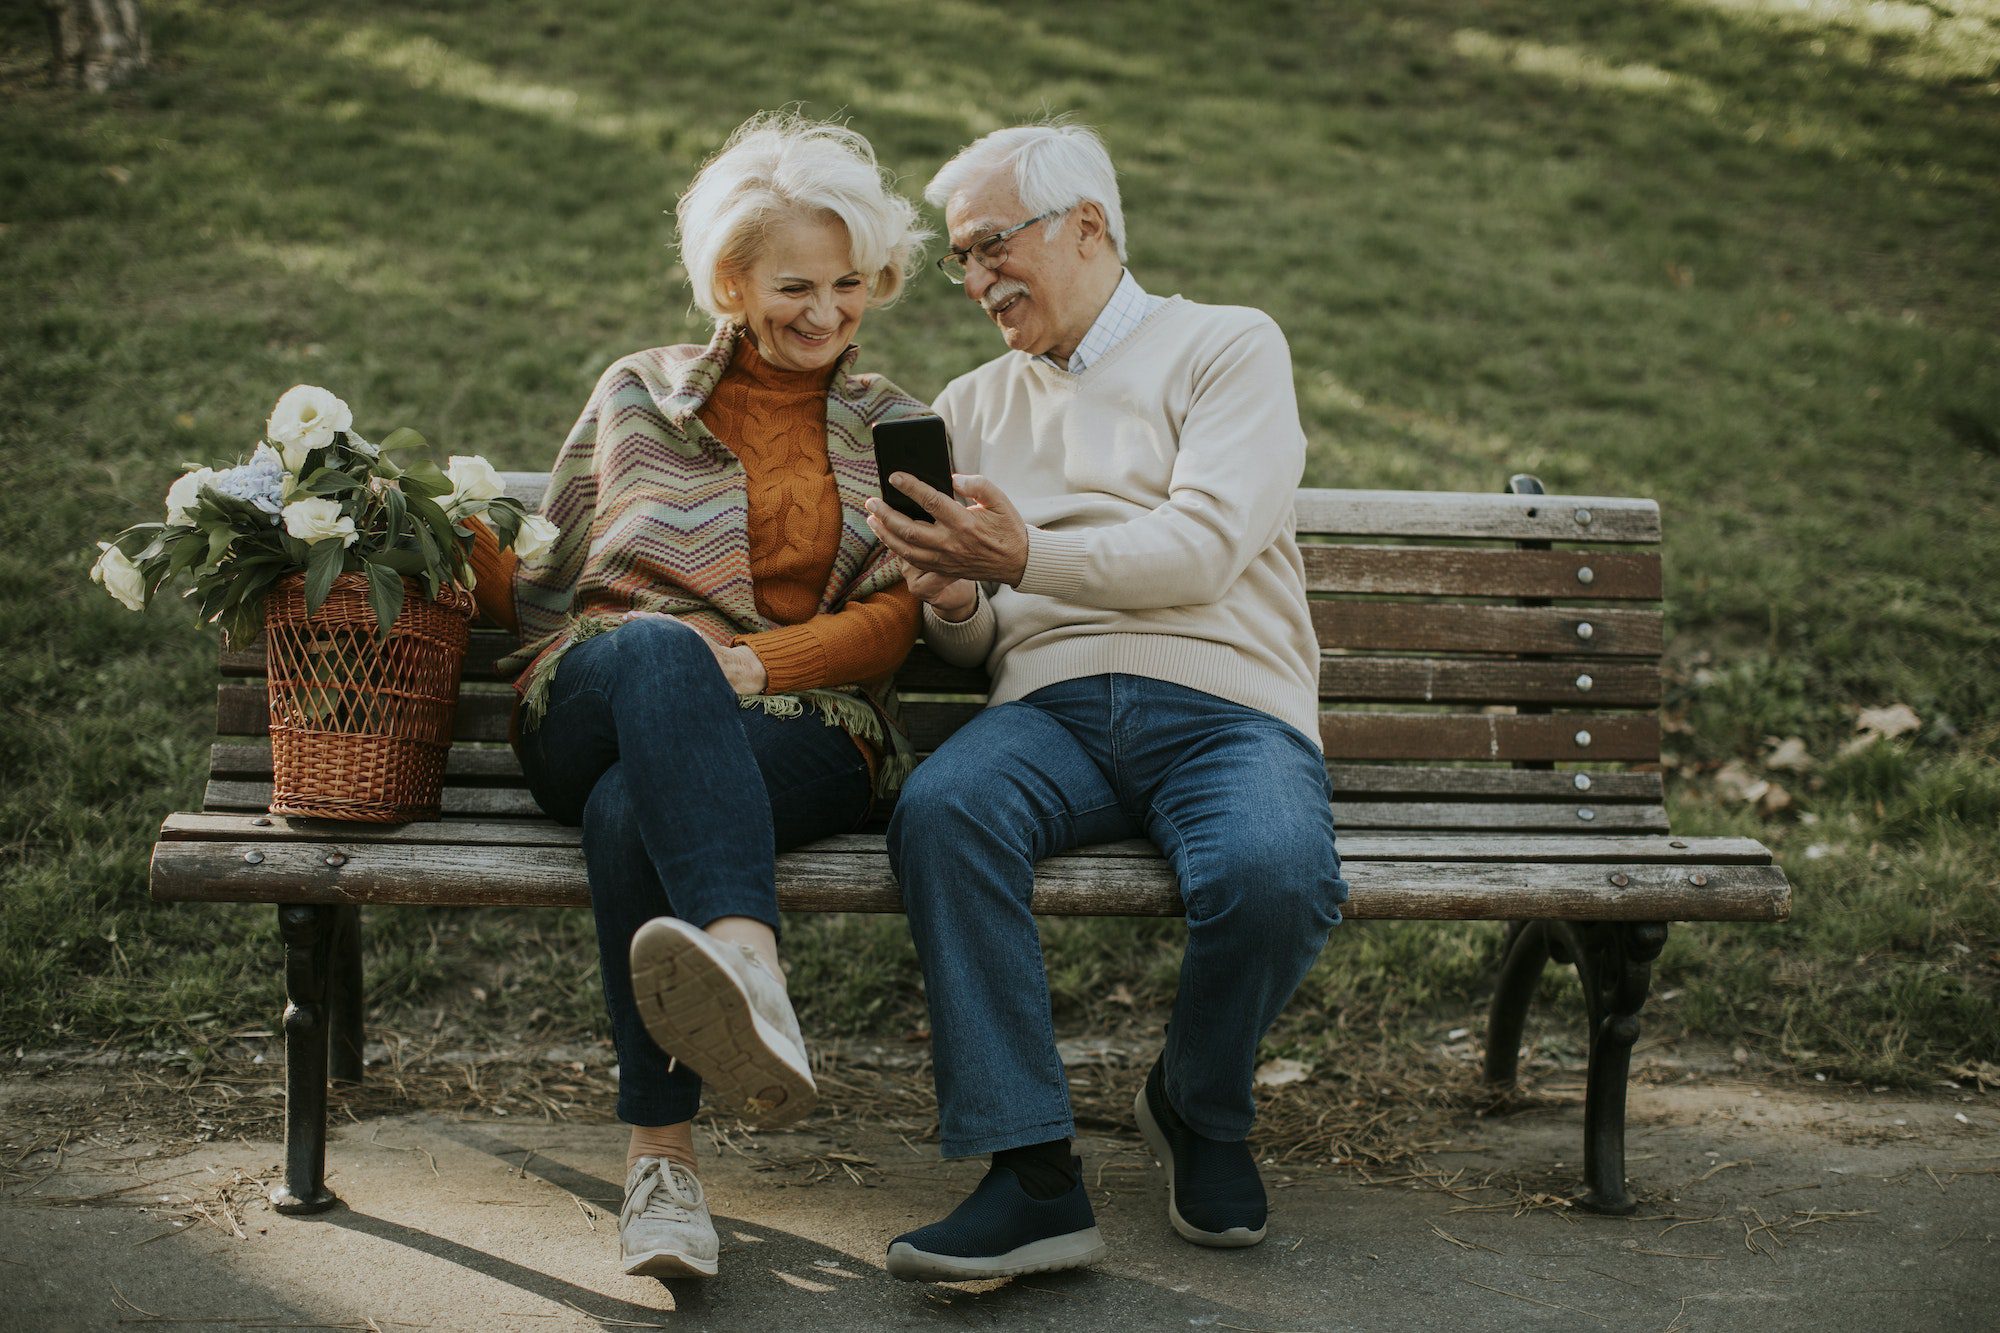 Senior couple sitting on the benchwith basket full of flowers and lookin at mobile phone checking on Medigap Premium increasing